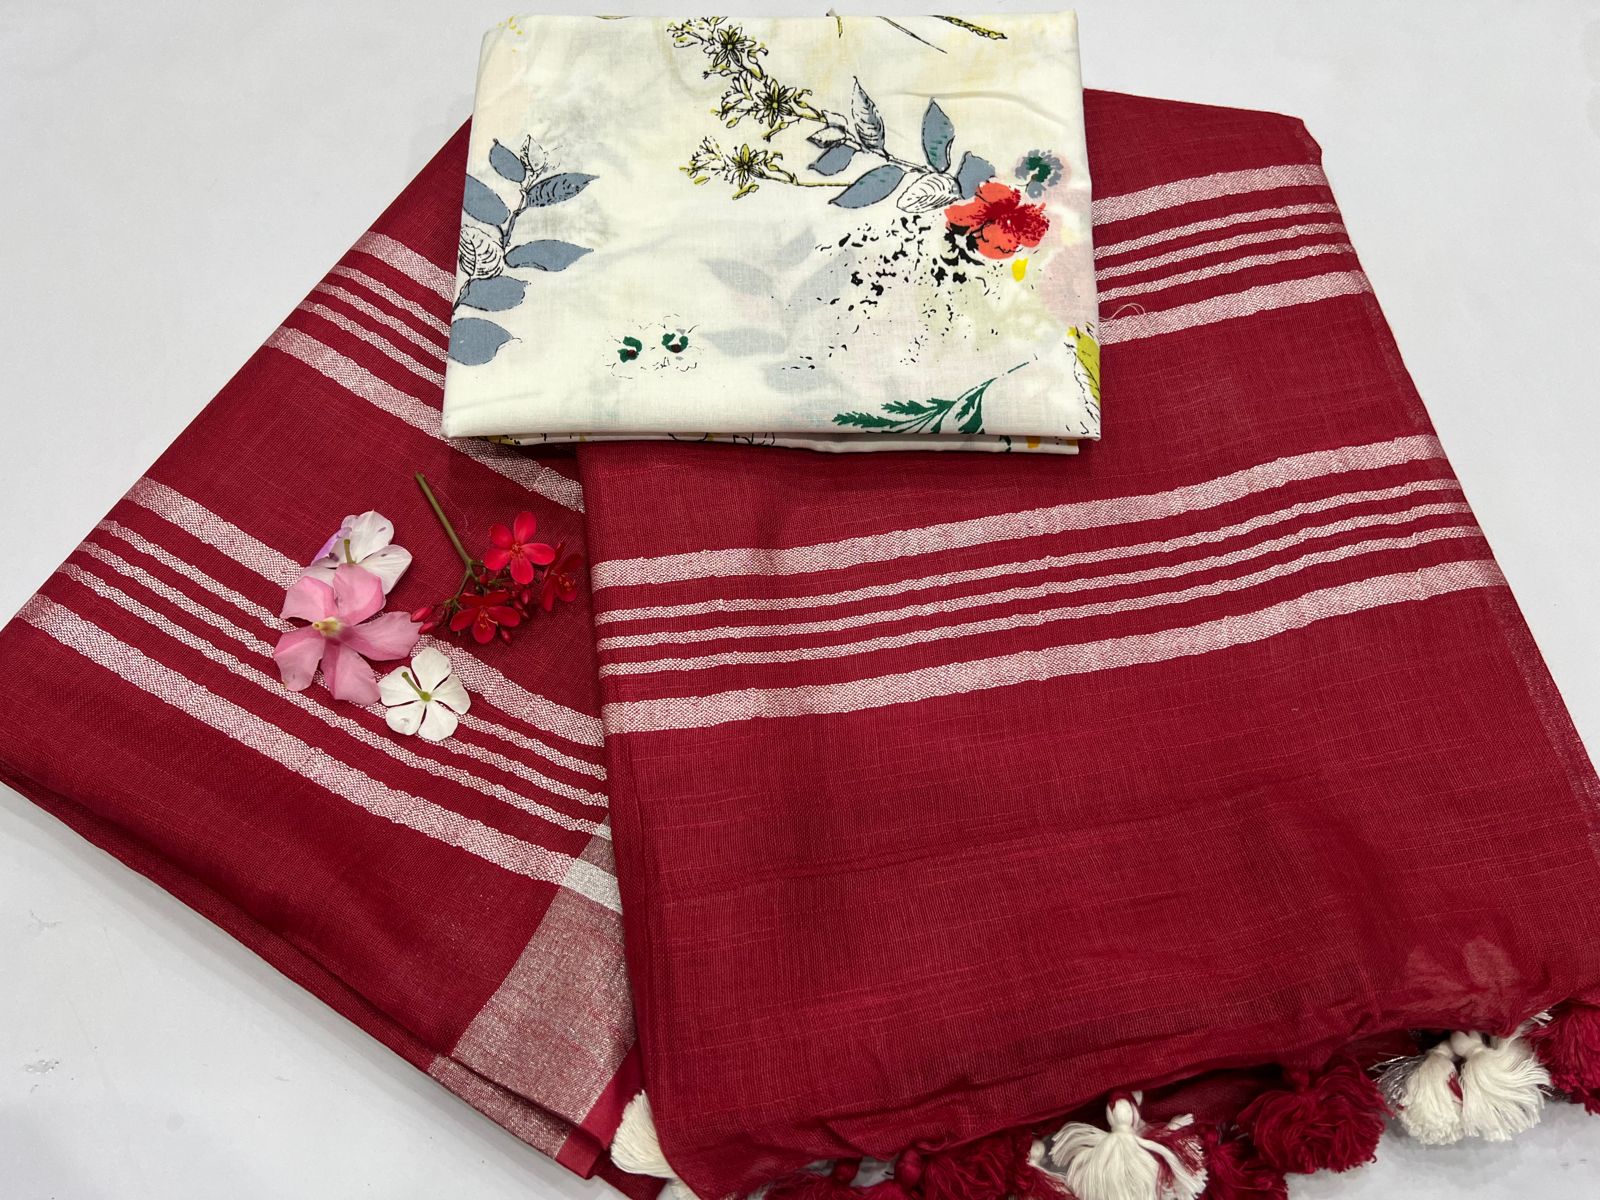 Vivid Burgundy plain linen latest saree collection with white printed blouse